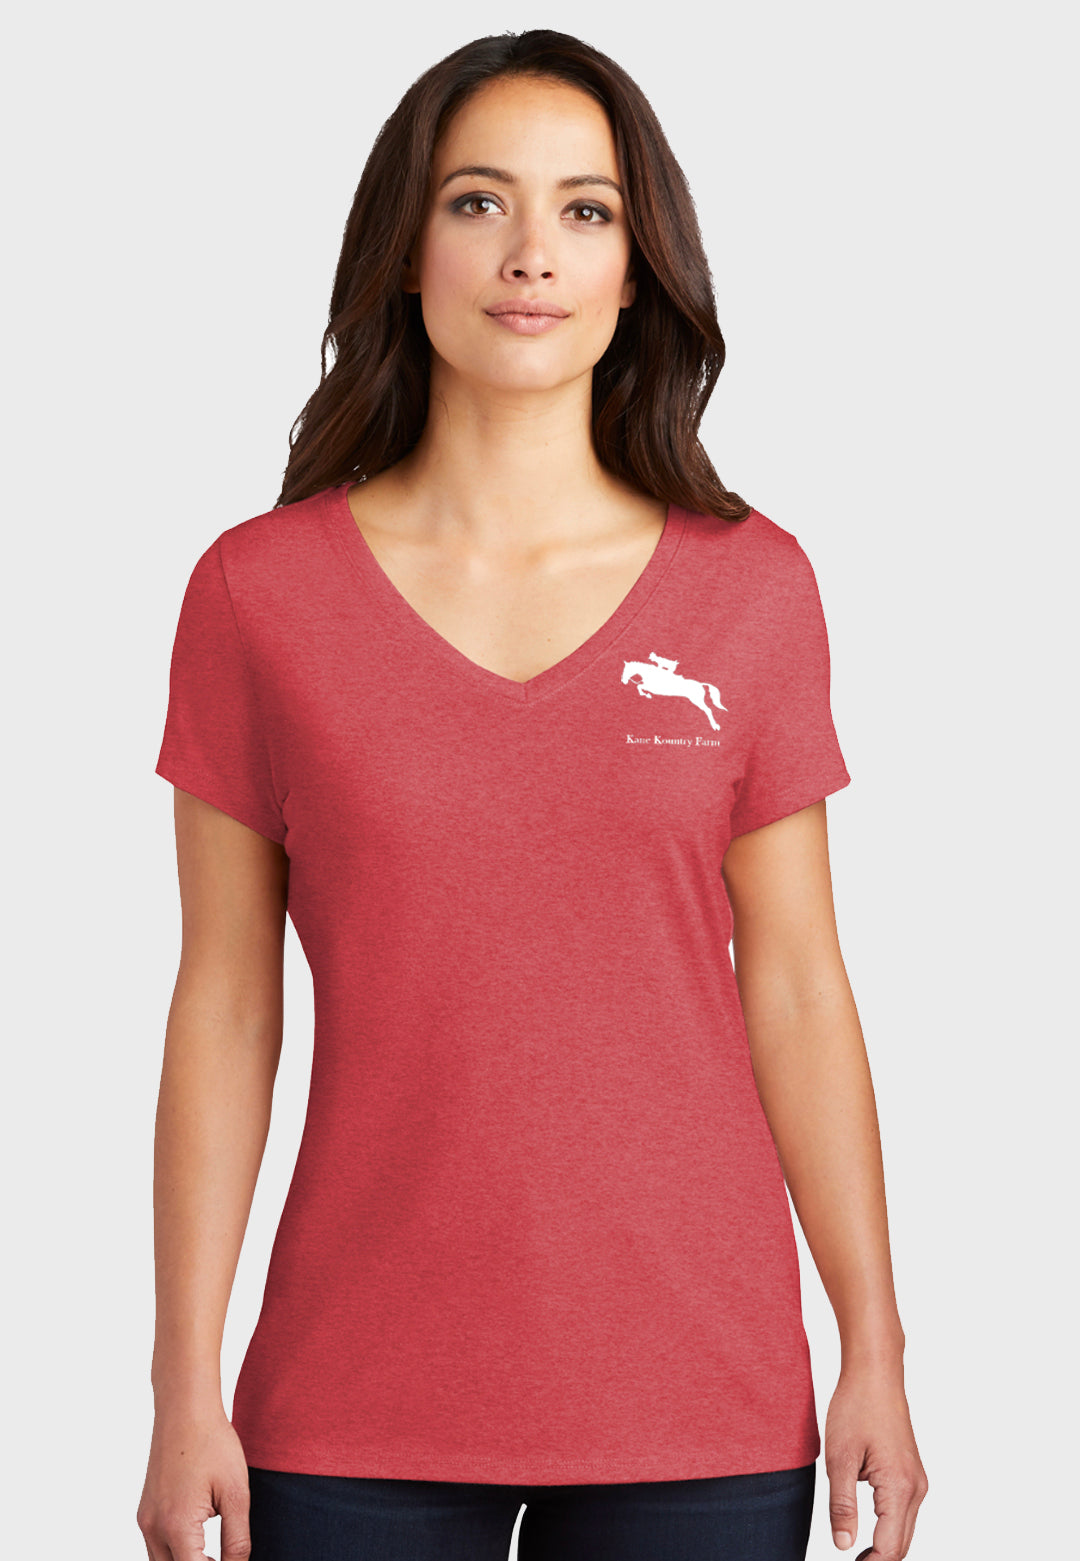 Kane Kountry Farm District ® Women’s Perfect Tri ® V-Neck Tee - Frost Red